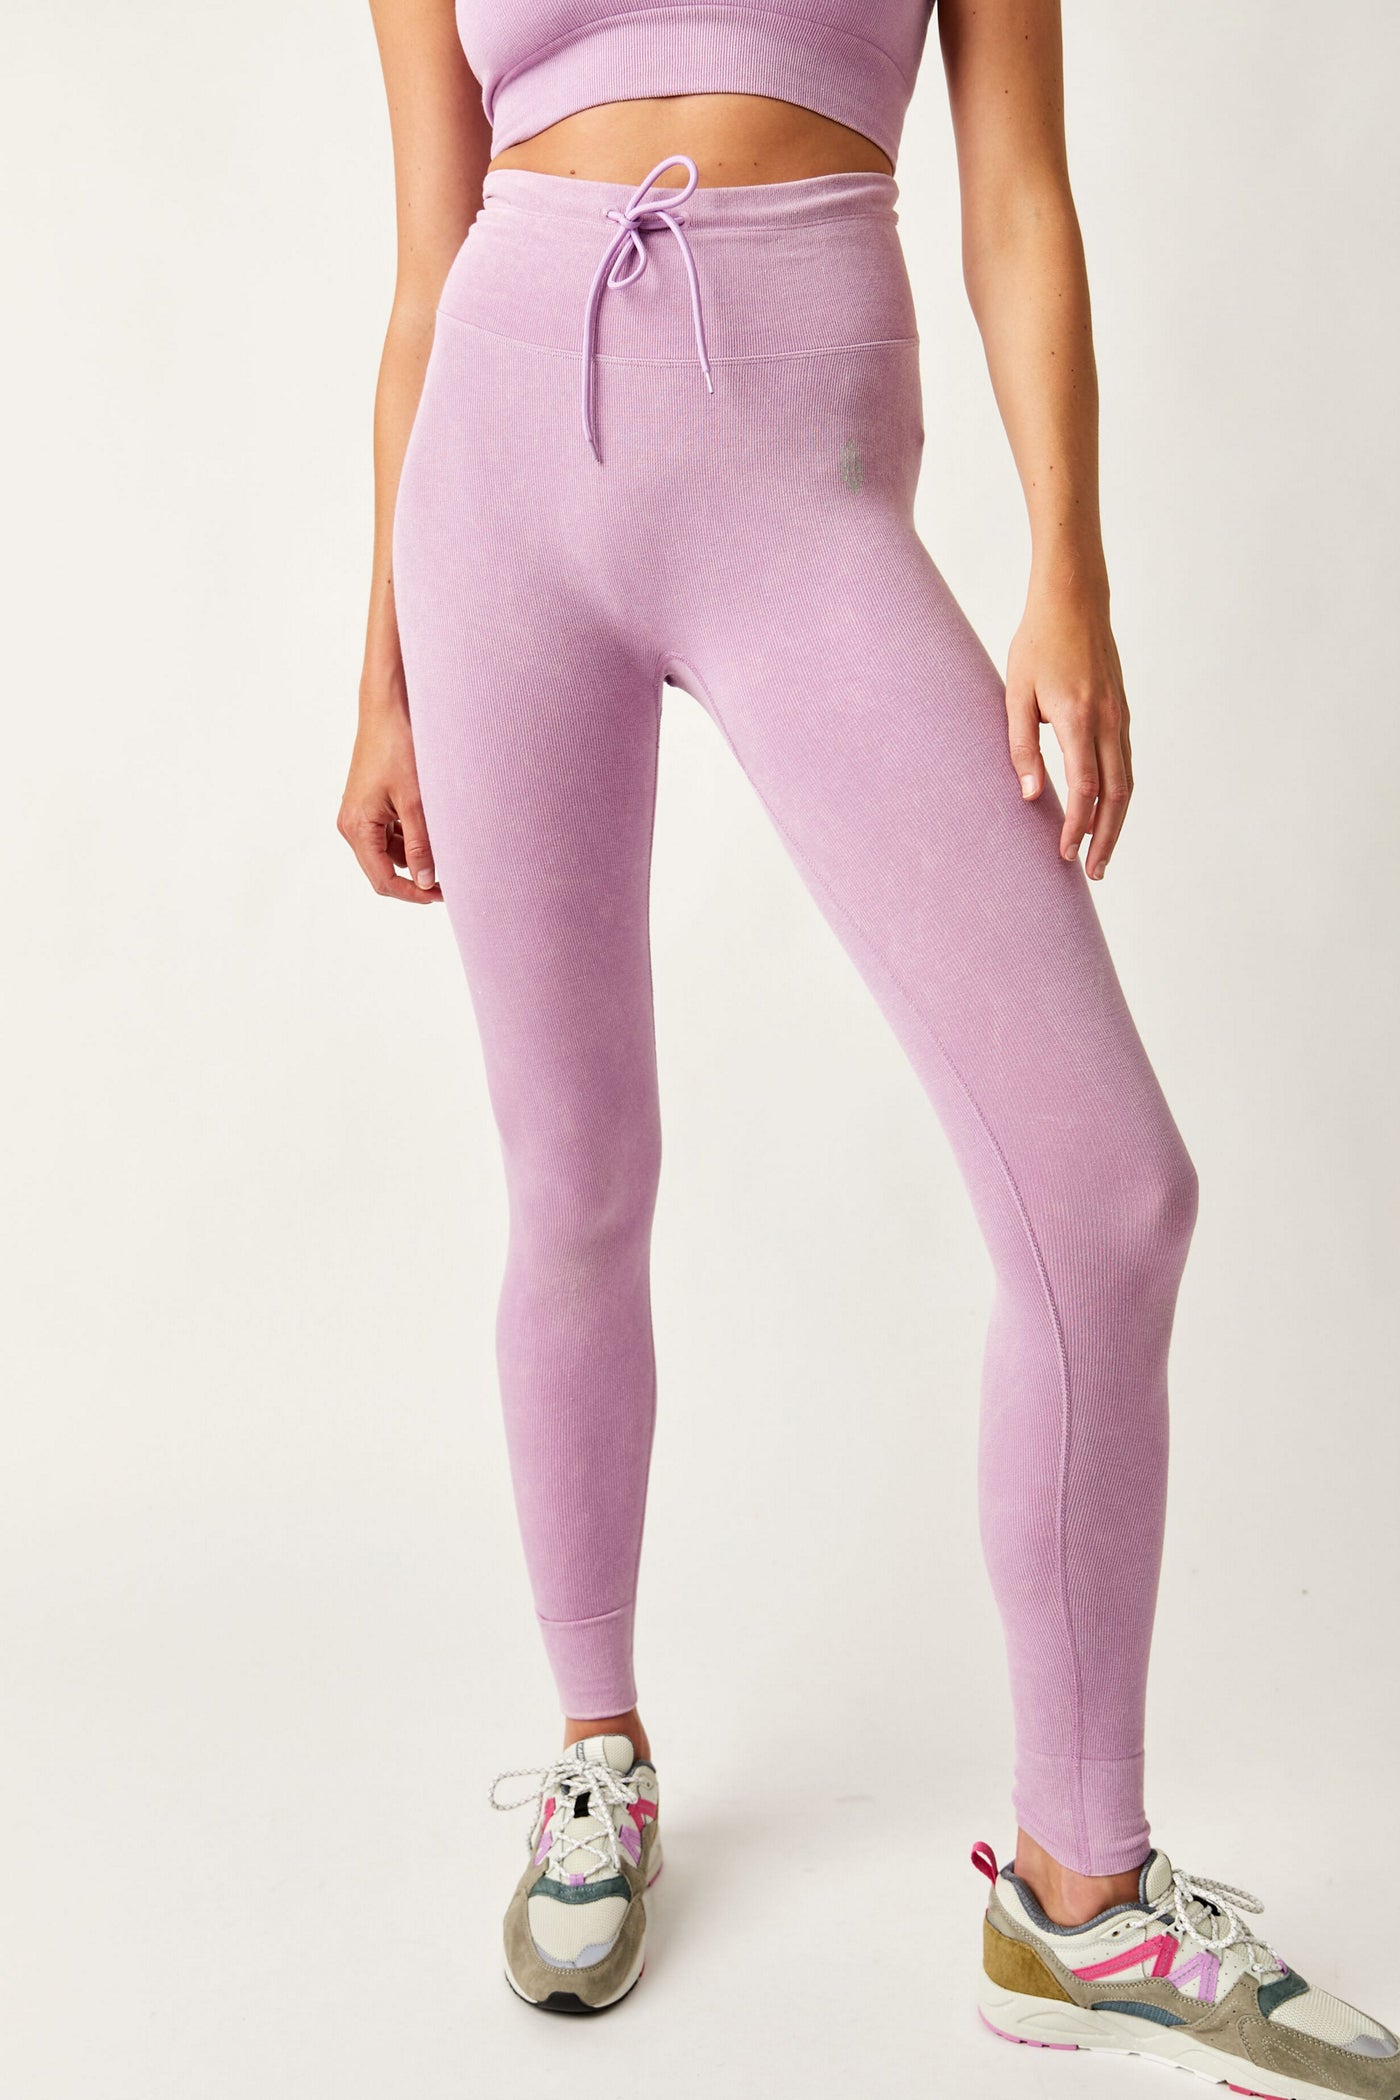 Free People Go To Legging - Washed Blossom